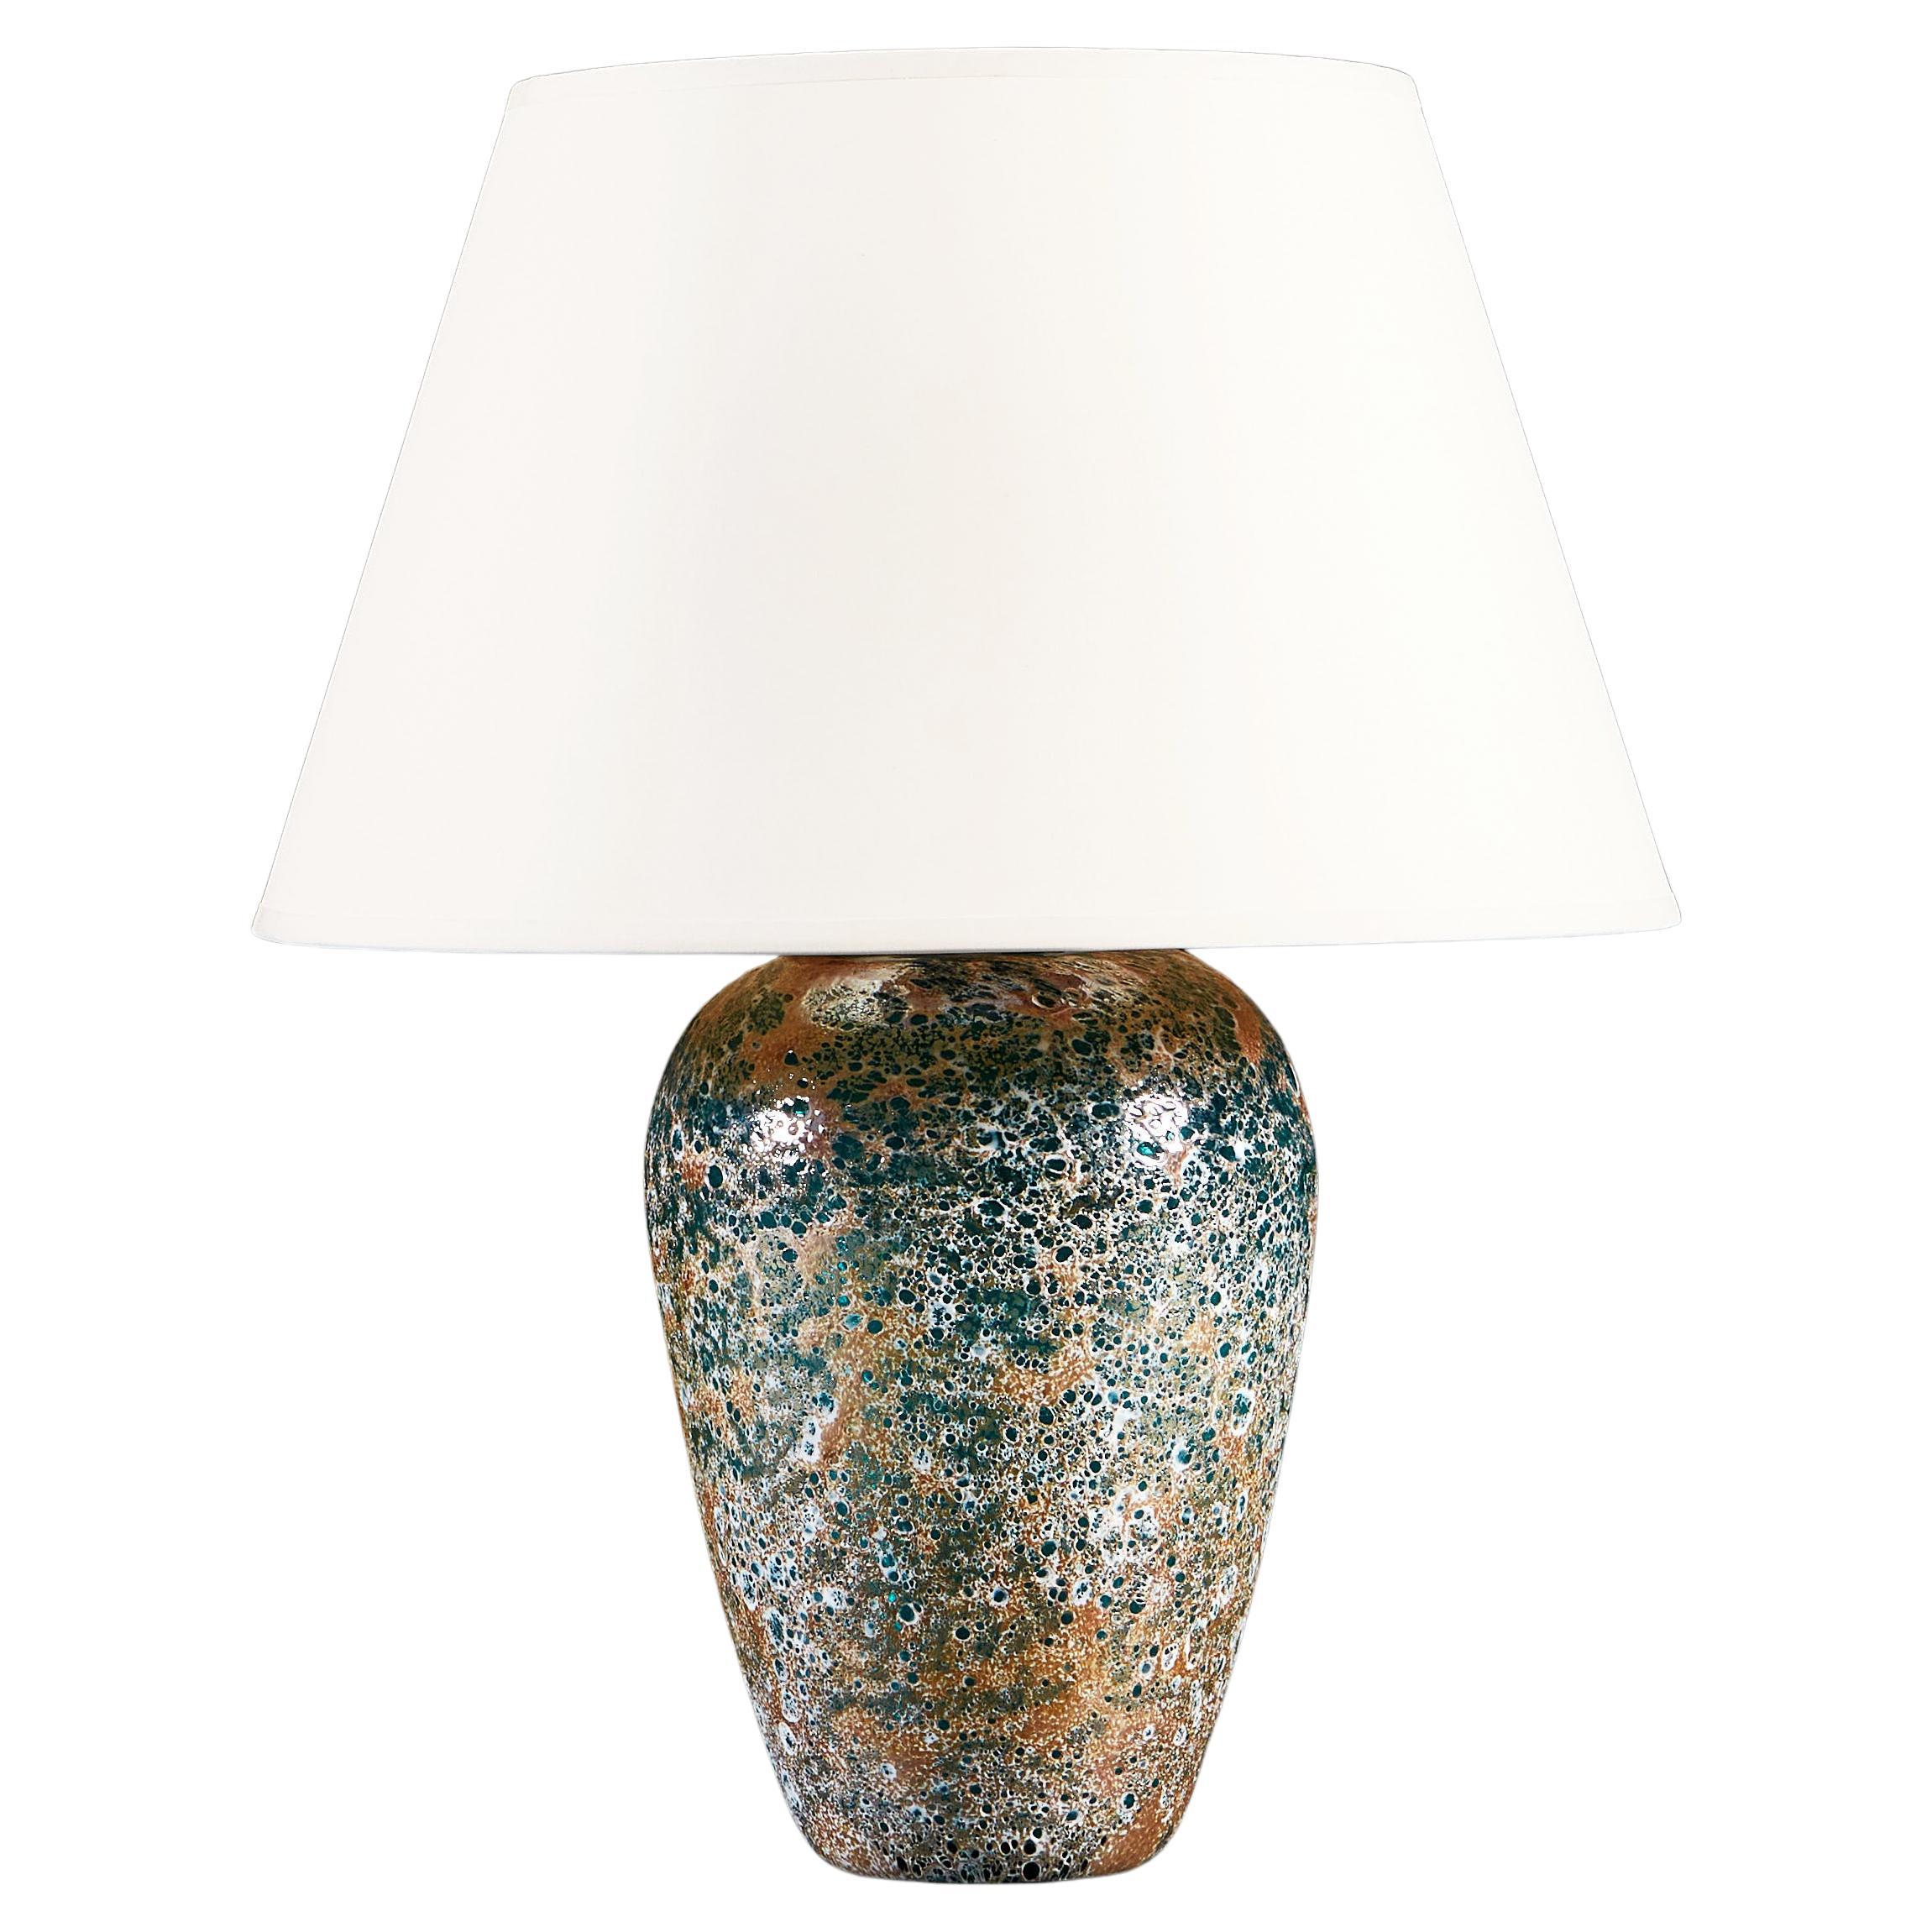 A 1940s Art Glass Vase as a Table Lamp